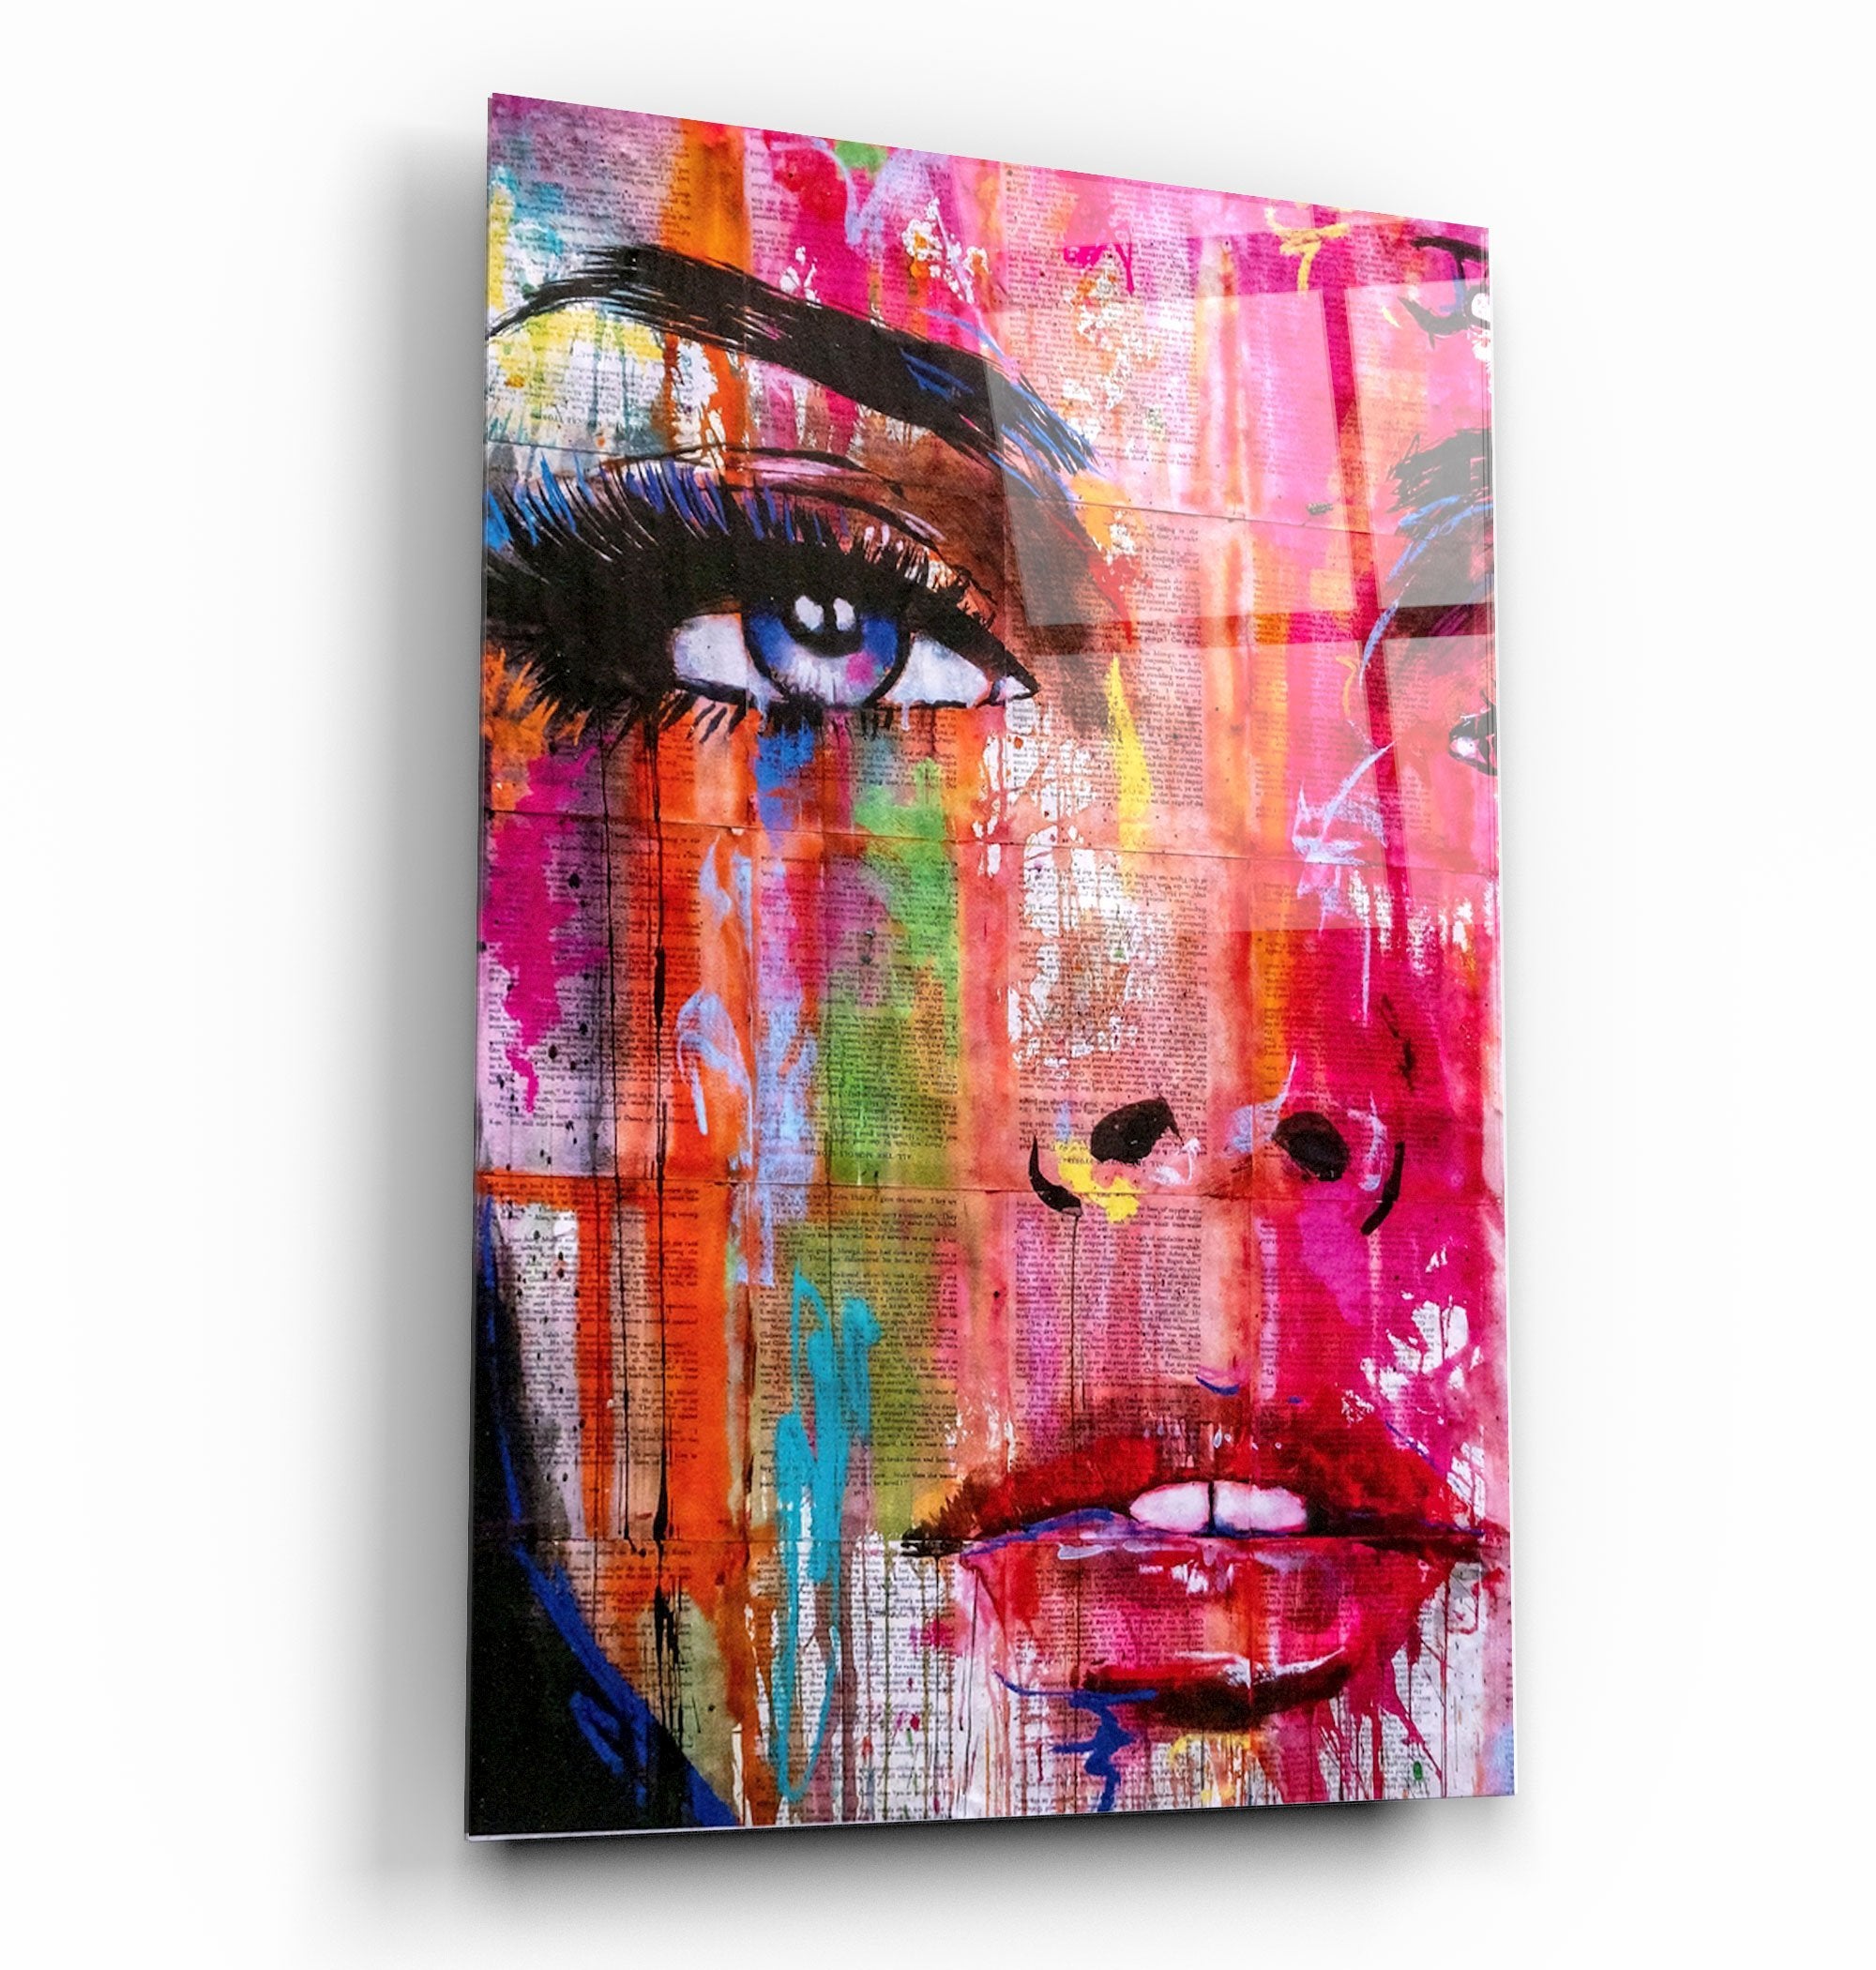 ・"Colorful Woman Face"・Glass Wall Art